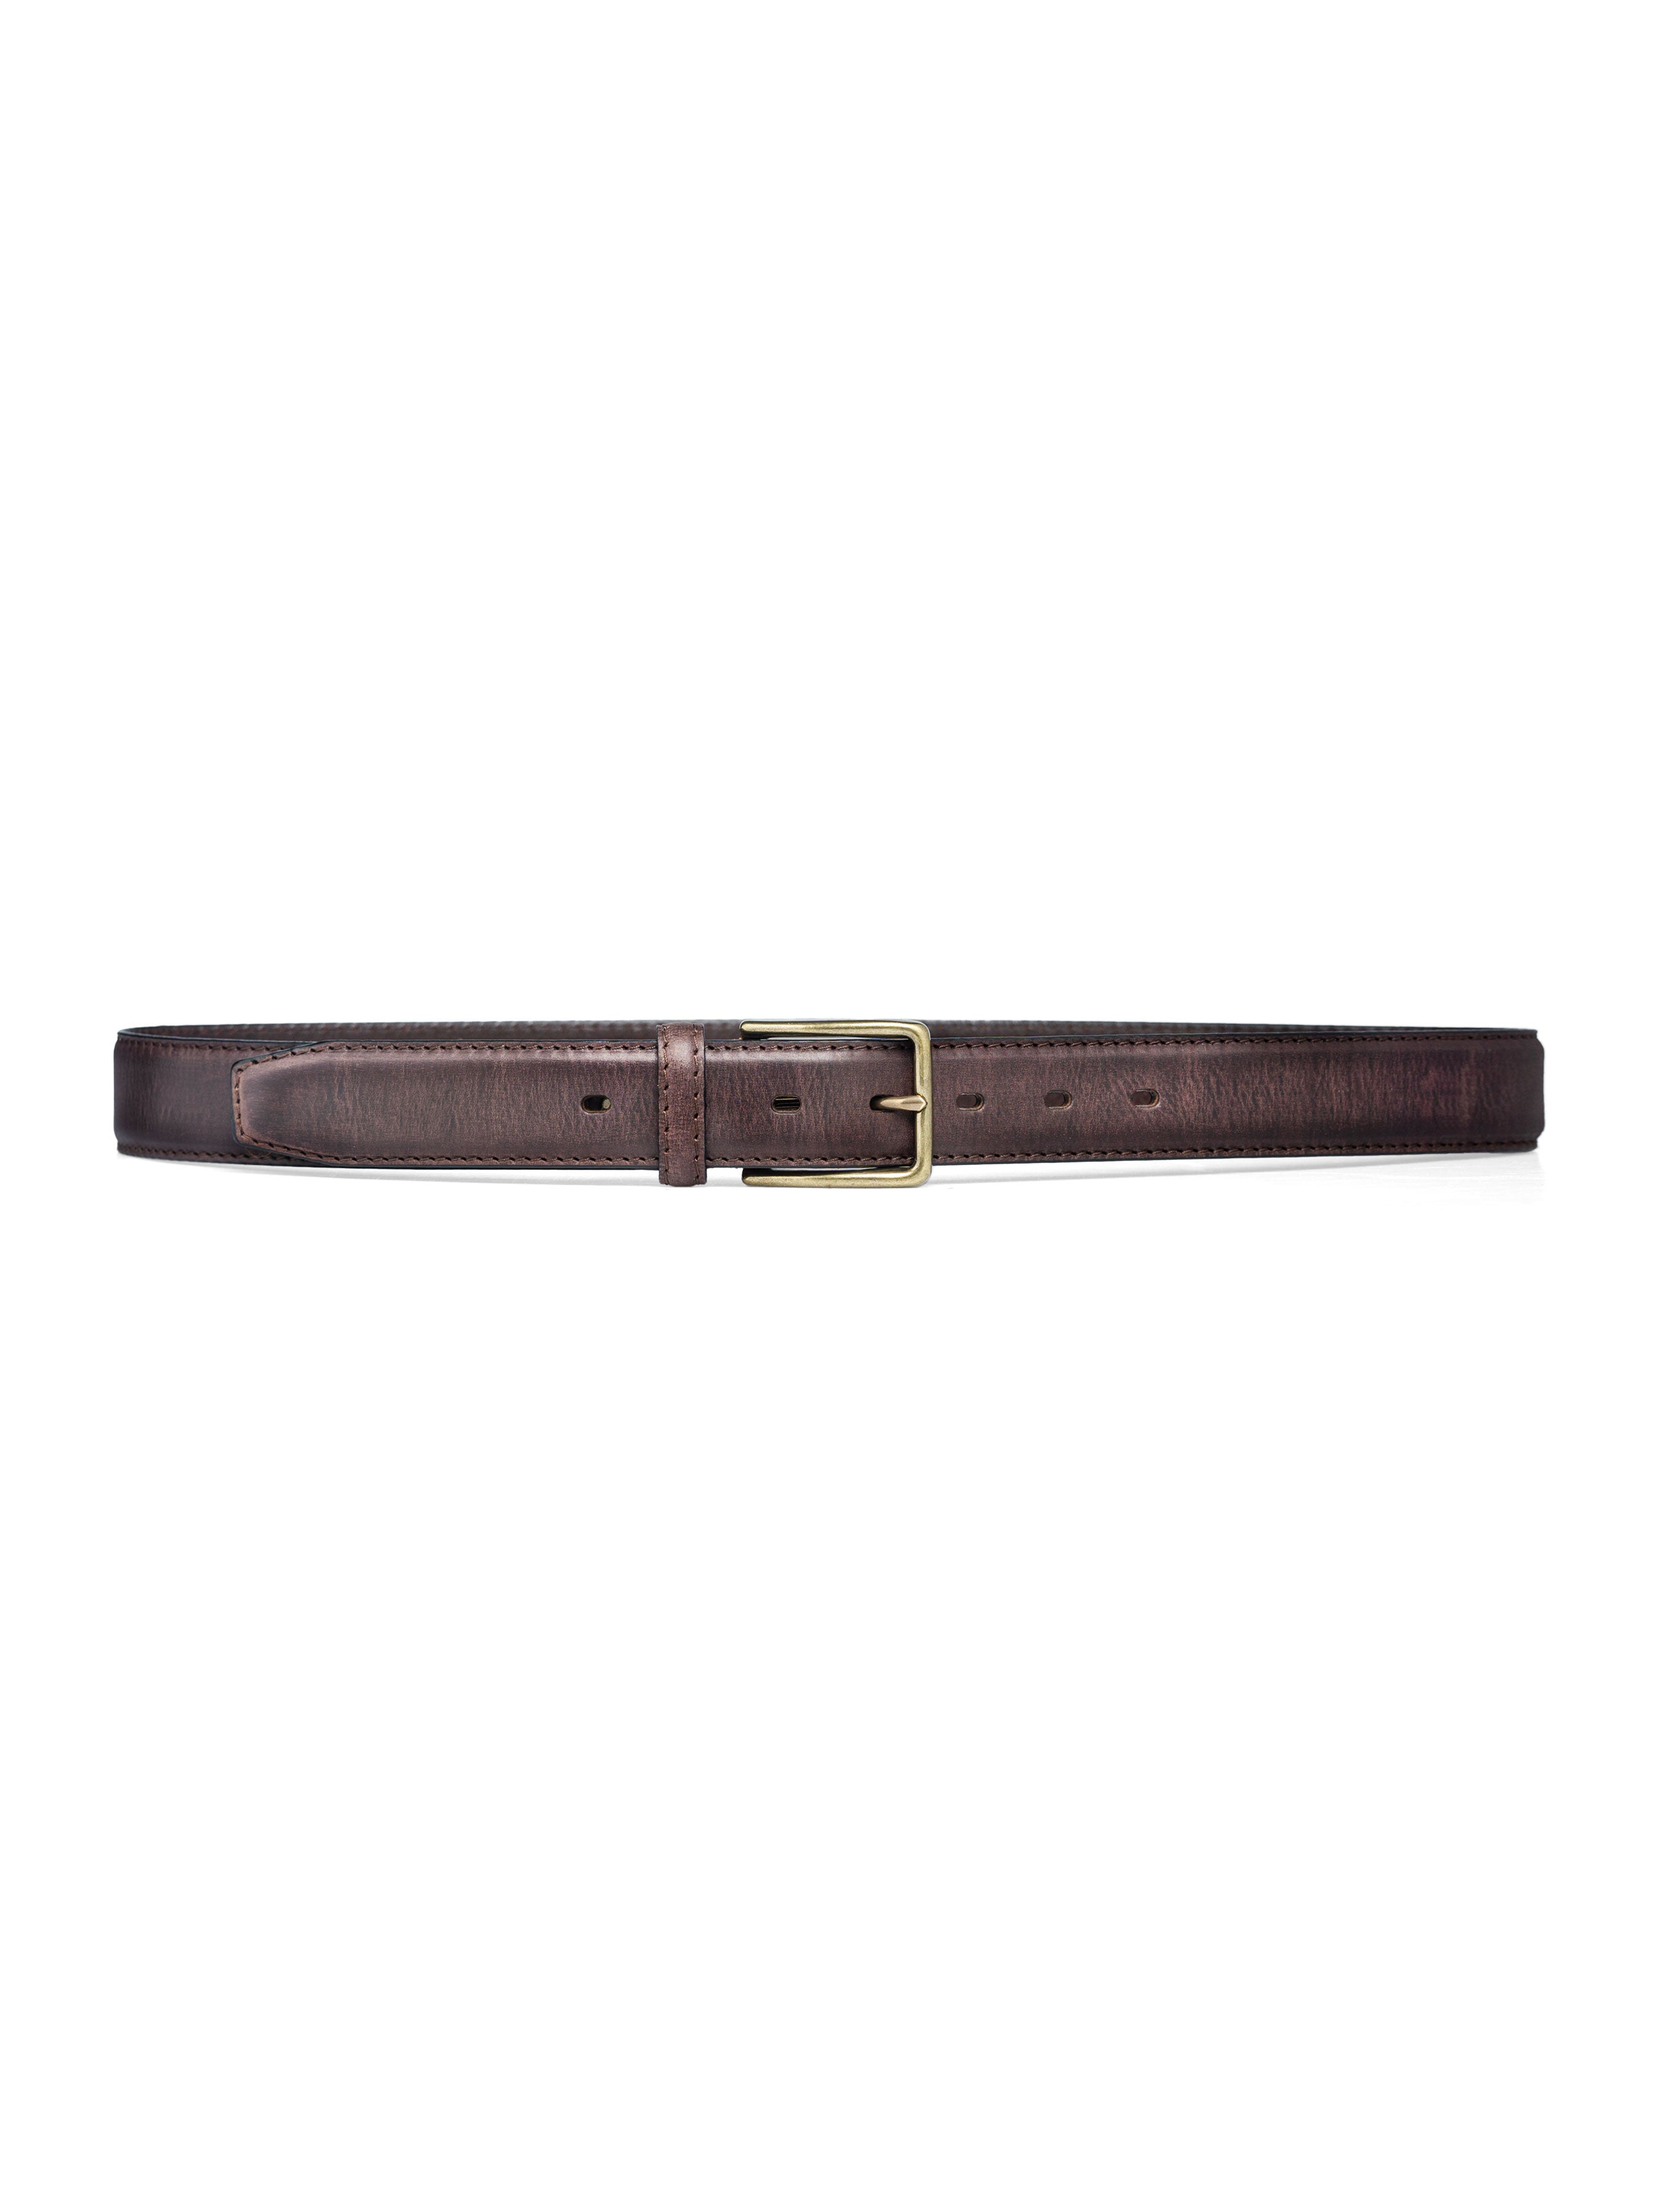 Italian Rustic Leather Belt with Frame Gold-toned Buckle - Zeve Shoes